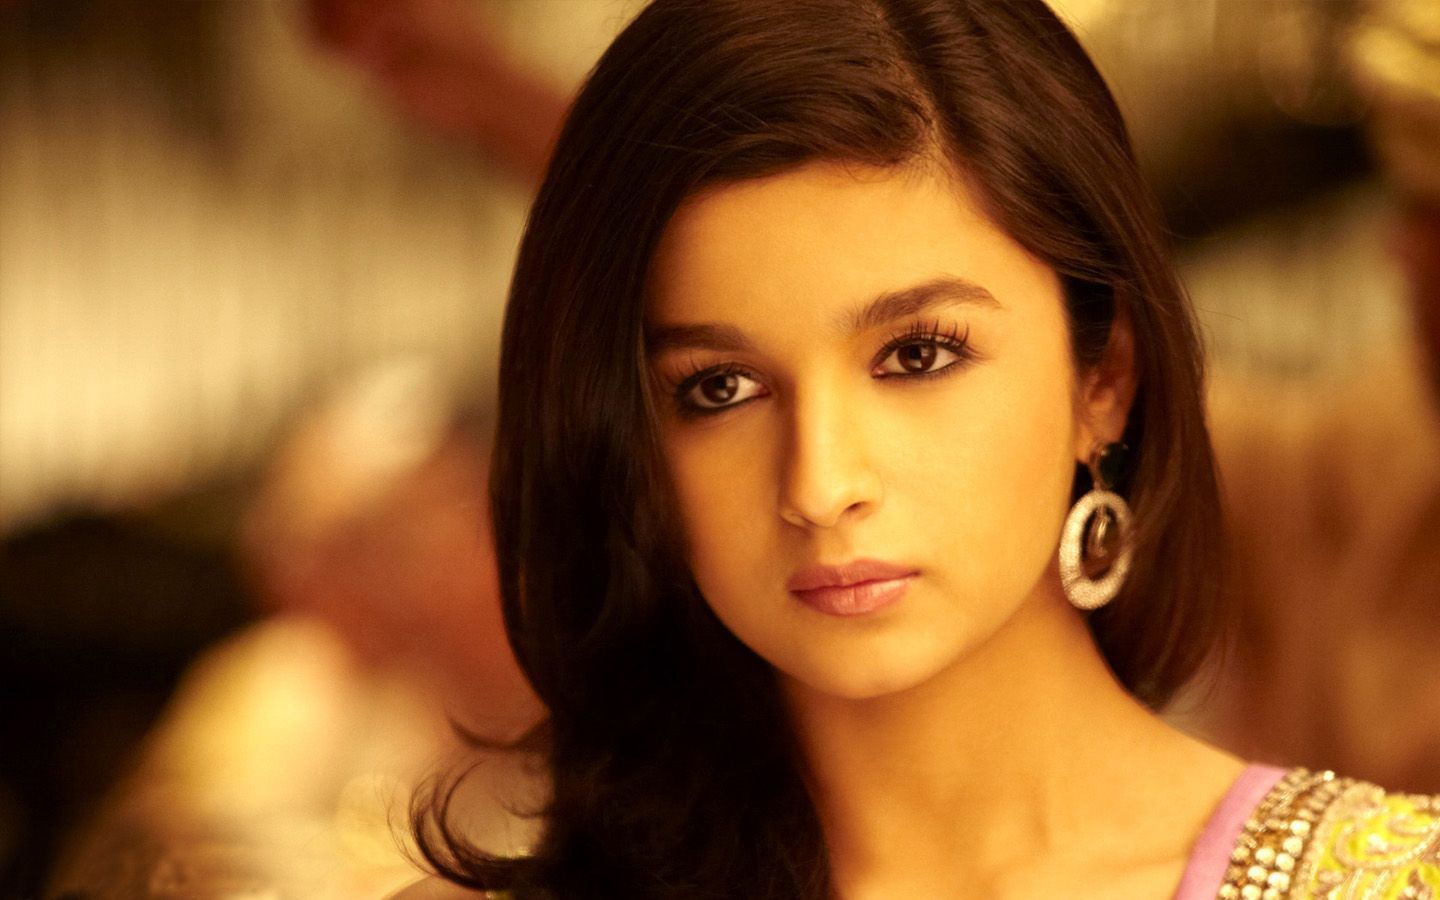 Download free Celebrity Wallpaper. Amazing collection of full screen Celebrity HD Wallpaper at 2880x 1920x. Alia bhatt, Beautiful indian actress, Alia